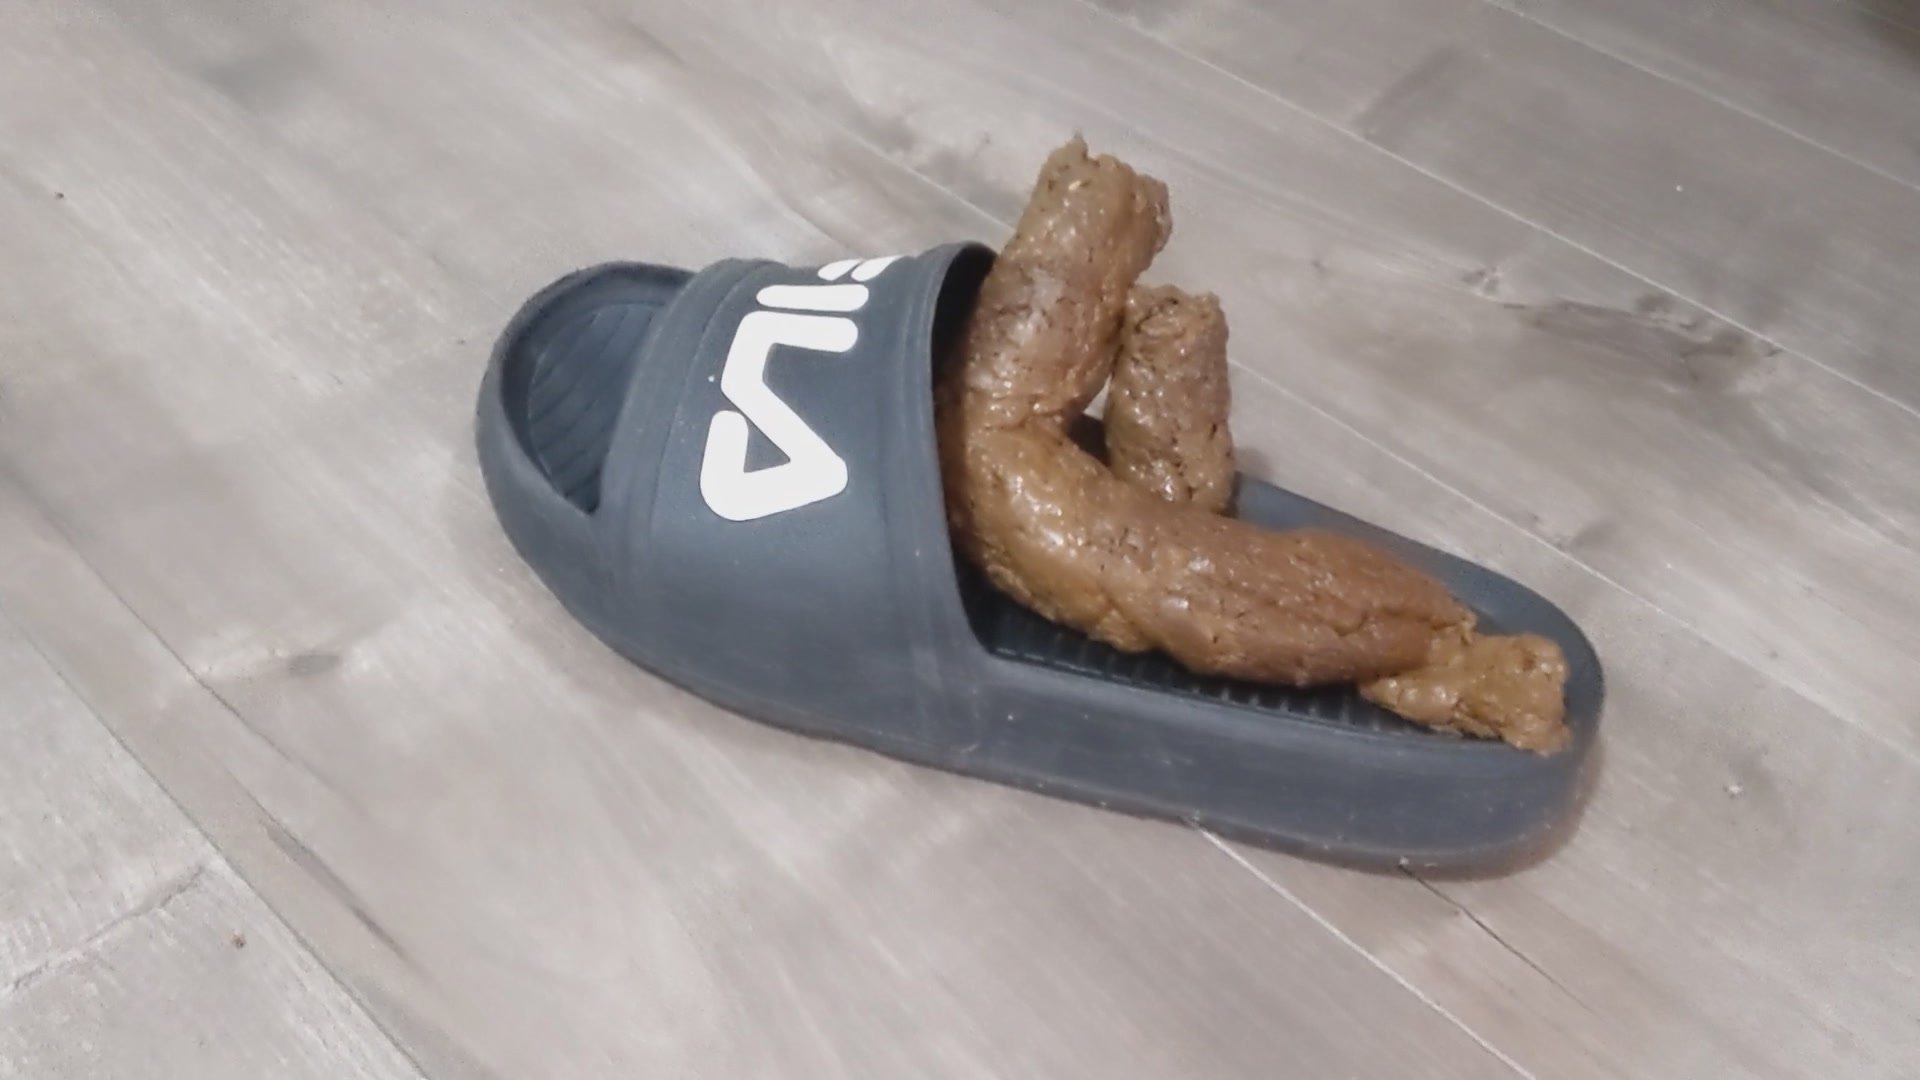 Twink Shitting on Sandals